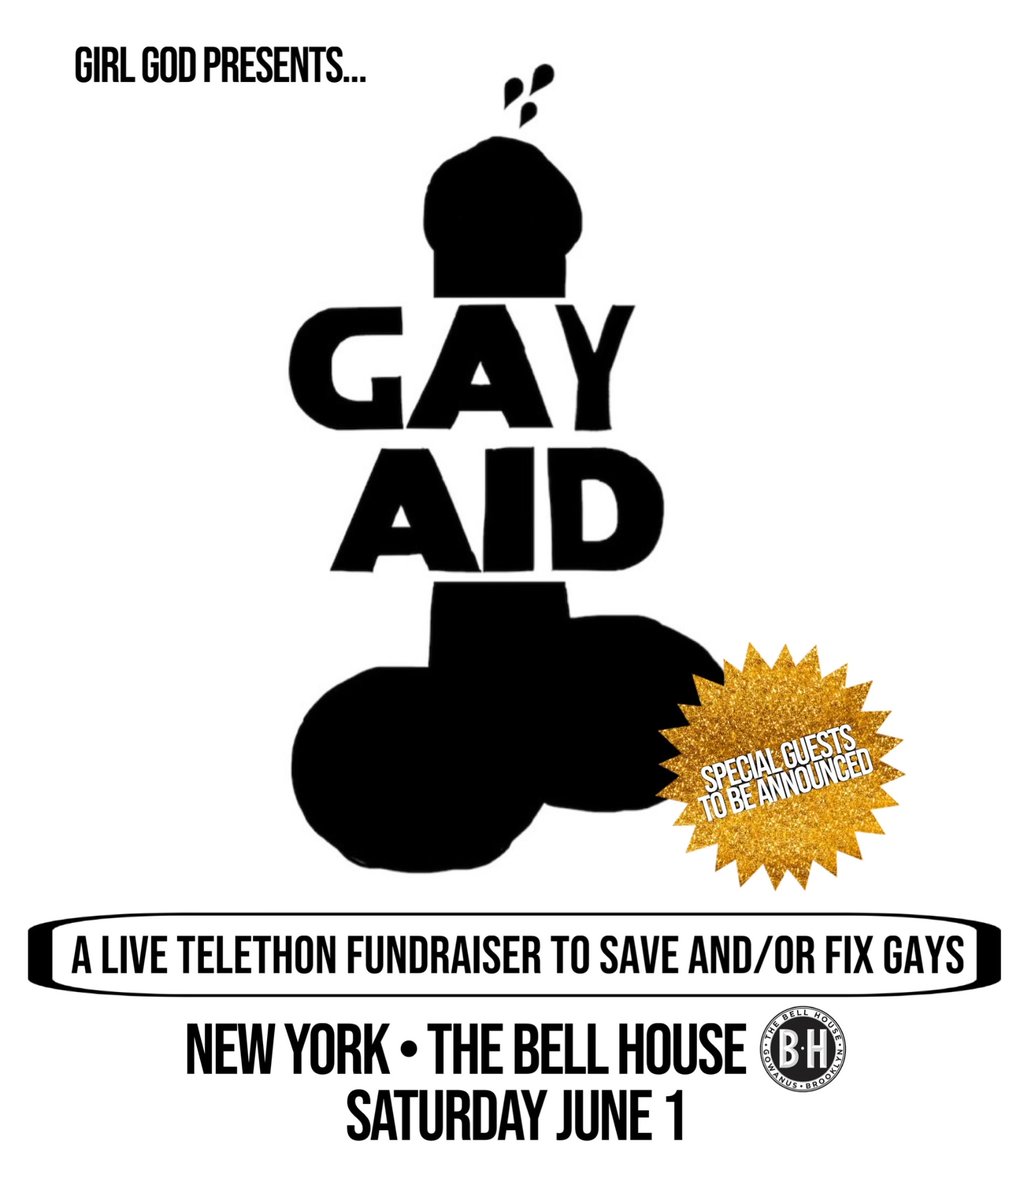 Girl God’s annual fake telethon to save and/or fix gays is in New York at the @BellHouseNY to kick off Pride Month this year!! Grab tix now before we announce our special guests and they vanish!! Here: eventbrite.com/e/girl-god-pre…